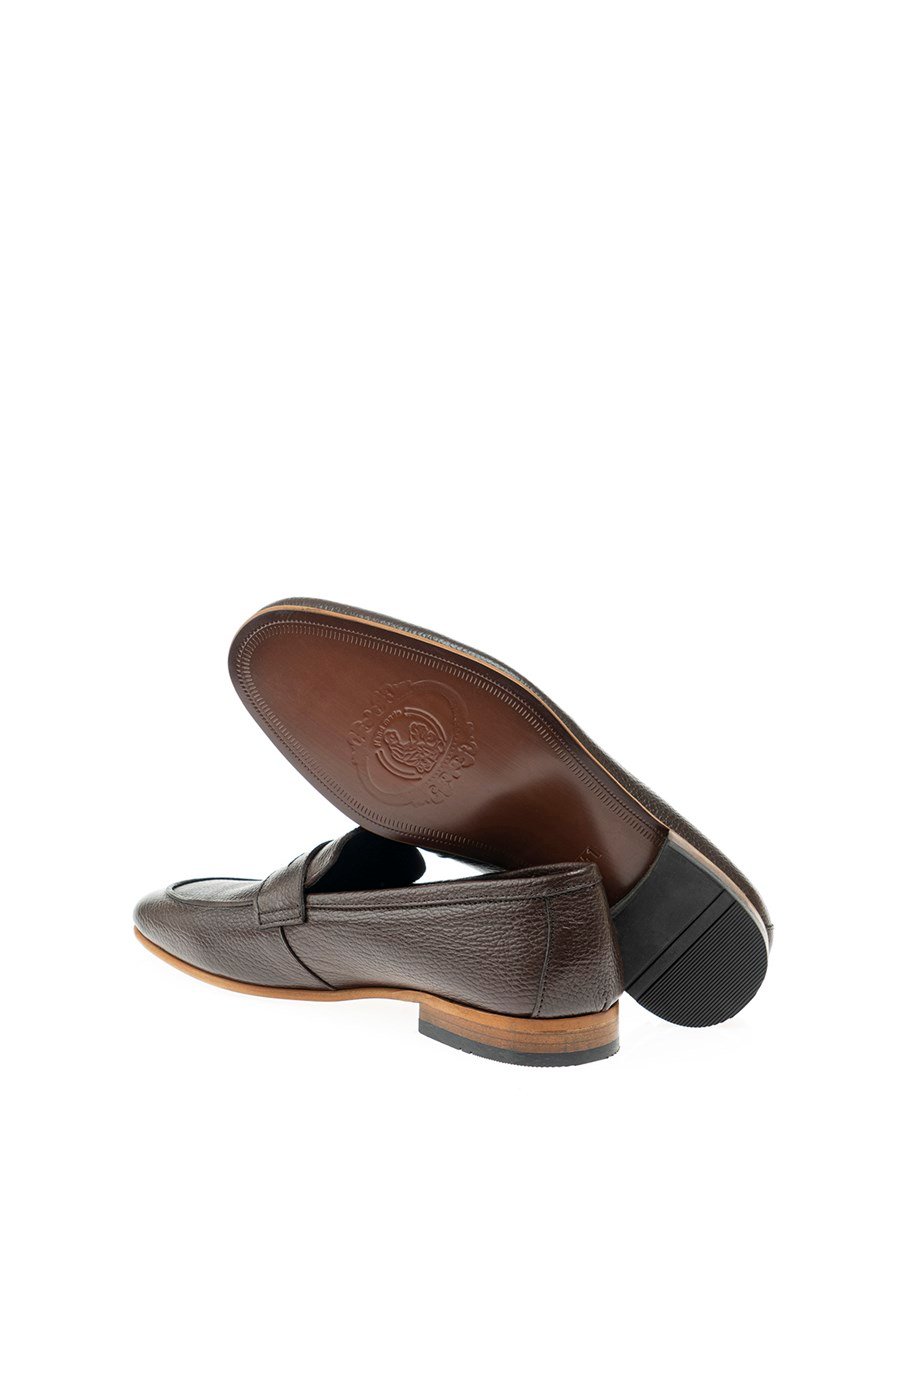 Brown Grainy penny Loafer